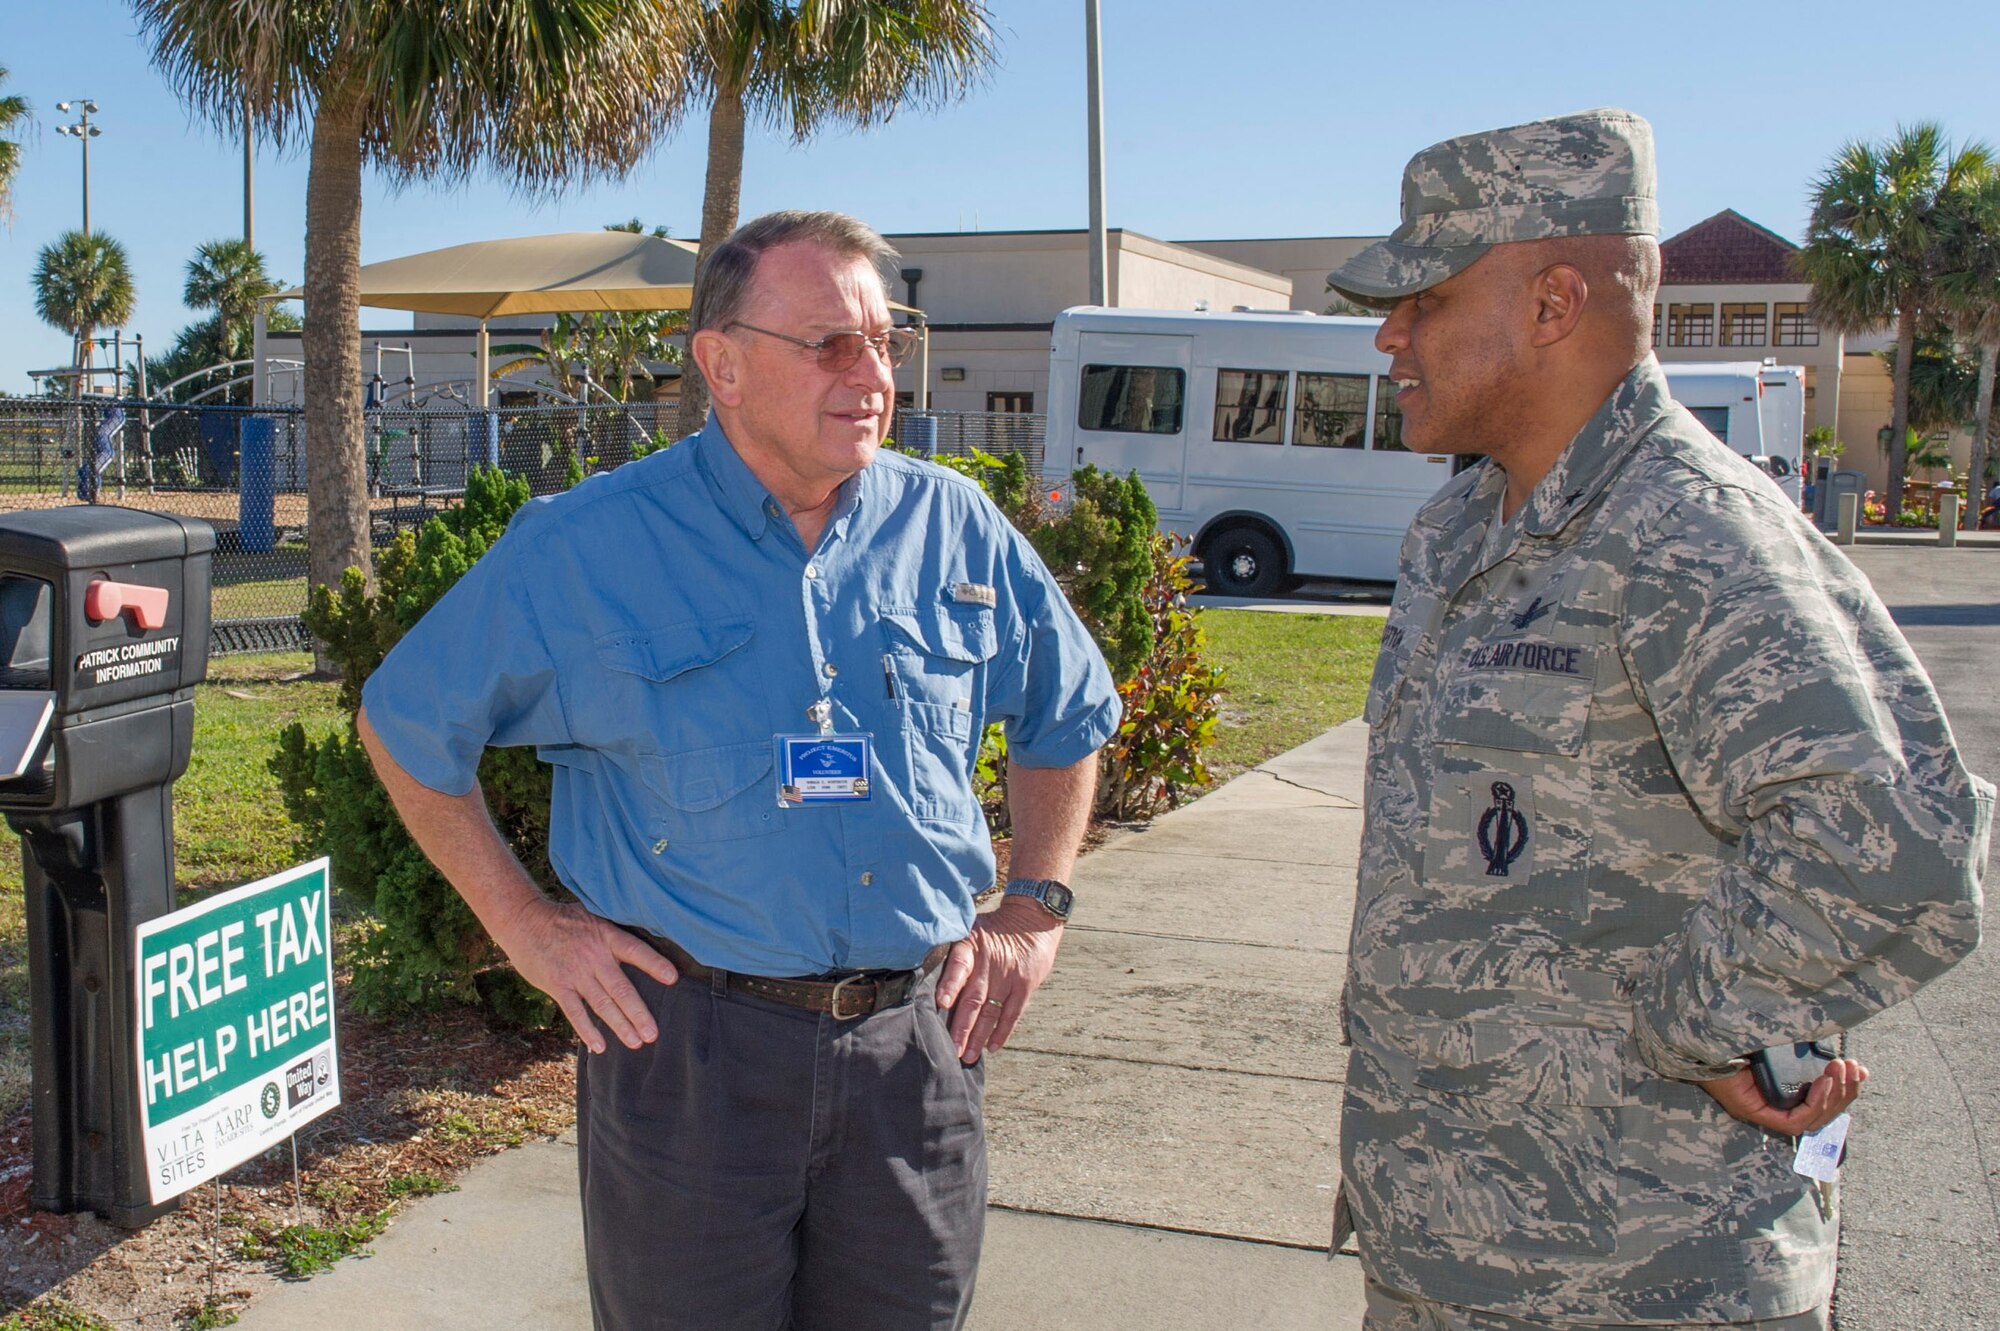 Brig. Gen. Anthony Cotton, commander, 45th Space Wing, chats with Don
Winterich about the PAFB Volunteer Income Tax Assistance (VITA) Program. The
VITA program offers a great, no-cost alternative to other commercial
preparers. The tax return preparation assistance service is only available
by appointment Monday through Friday, from 9 a.m. to 5 p.m. To make an
appointment, call 494-4718.  
